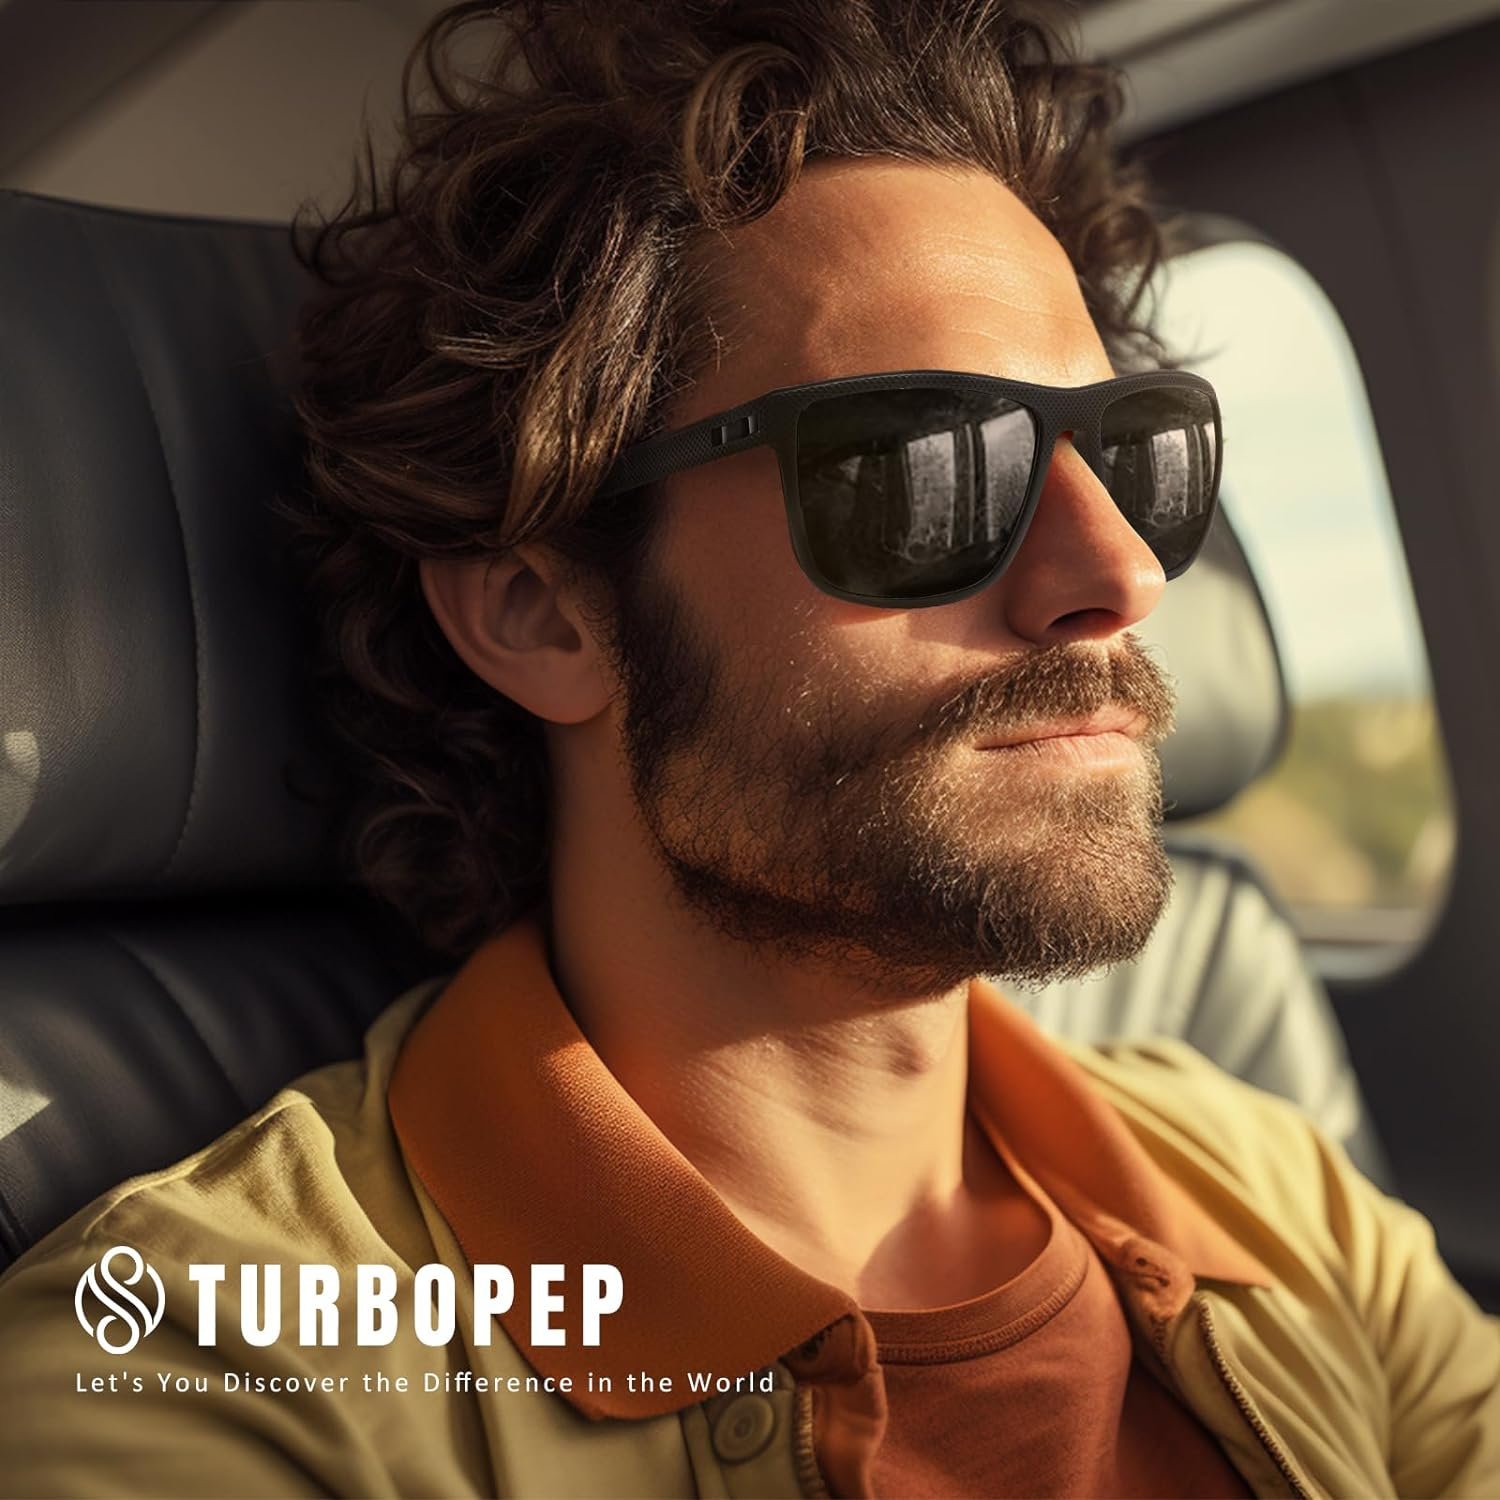 TURBOPEP Square Polarized Sunglasses Review